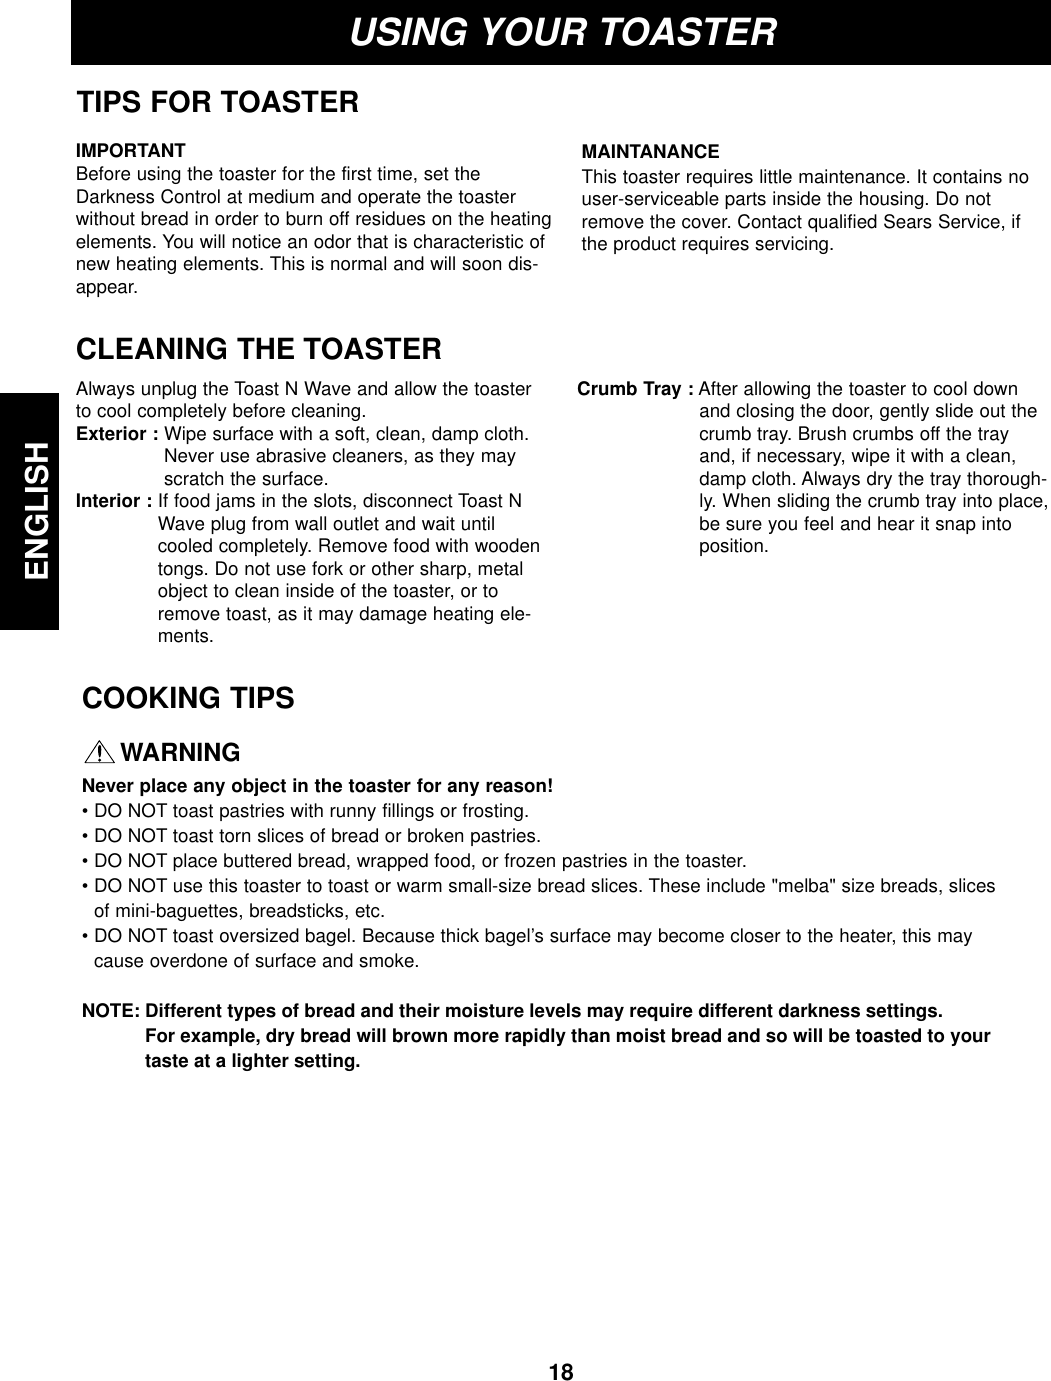 18ENGLISHUSING YOUR TOASTERTIPS FOR TOASTERCLEANING THE TOASTERAlways unplug the Toast N Wave and allow the toasterto cool completely before cleaning.Exterior : Wipe surface with a soft, clean, damp cloth.Never use abrasive cleaners, as they mayscratch the surface.Interior : If food jams in the slots, disconnect Toast NWave plug from wall outlet and wait untilcooled completely. Remove food with woodentongs. Do not use fork or other sharp, metalobject to clean inside of the toaster, or toremove toast, as it may damage heating ele-ments.Crumb Tray : After allowing the toaster to cool downand closing the door, gently slide out thecrumb tray. Brush crumbs off the trayand, if necessary, wipe it with a clean,damp cloth. Always dry the tray thorough-ly. When sliding the crumb tray into place,be sure you feel and hear it snap intoposition.IMPORTANTBefore using the toaster for the first time, set theDarkness Control at medium and operate the toasterwithout bread in order to burn off residues on the heatingelements. You will notice an odor that is characteristic ofnew heating elements. This is normal and will soon dis-appear.MAINTANANCEThis toaster requires little maintenance. It contains nouser-serviceable parts inside the housing. Do notremove the cover. Contact qualified Sears Service, ifthe product requires servicing.COOKING TIPSWARNINGNever place any object in the toaster for any reason!• DO NOT toast pastries with runny fillings or frosting.• DO NOT toast torn slices of bread or broken pastries.• DO NOT place buttered bread, wrapped food, or frozen pastries in the toaster.• DO NOT use this toaster to toast or warm small-size bread slices. These include &quot;melba&quot; size breads, slicesof mini-baguettes, breadsticks, etc.• DO NOT toast oversized bagel. Because thick bagel’s surface may become closer to the heater, this maycause overdone of surface and smoke.NOTE: Different types of bread and their moisture levels may require different darkness settings. For example, dry bread will brown more rapidly than moist bread and so will be toasted to yourtaste at a lighter setting.